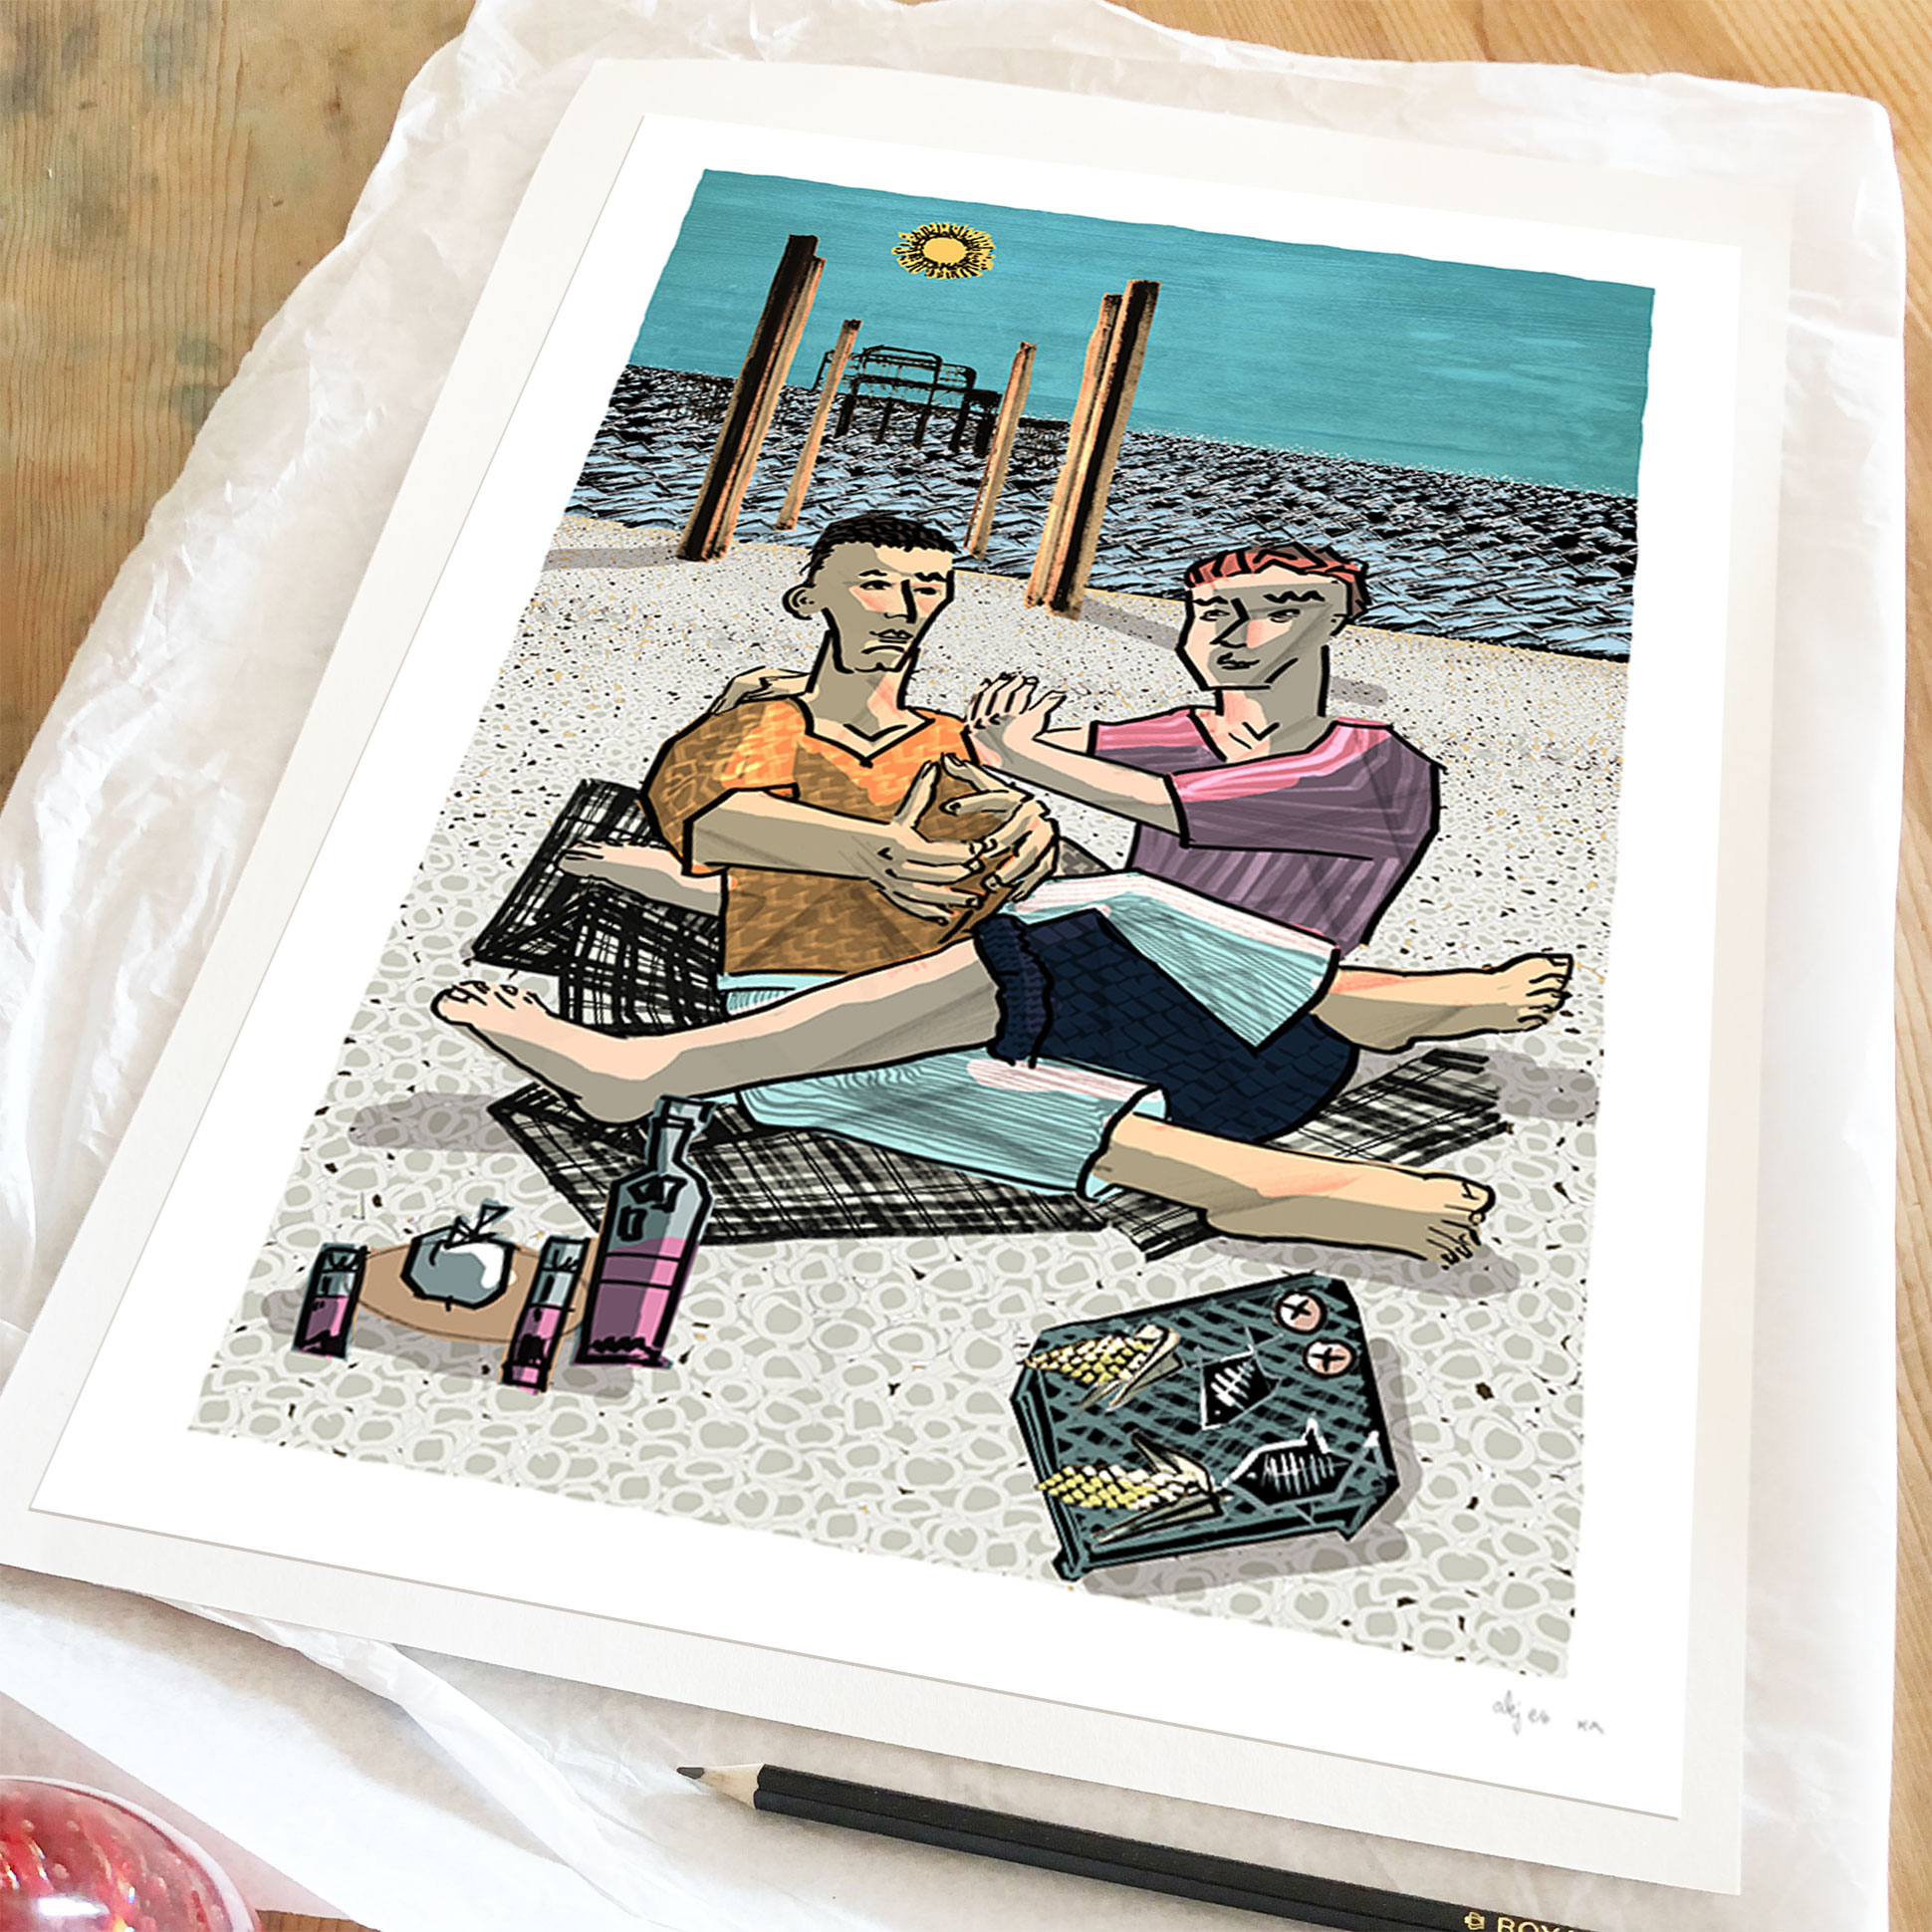 Print titled The Barbeque on Brighton Beach by artist alej ez